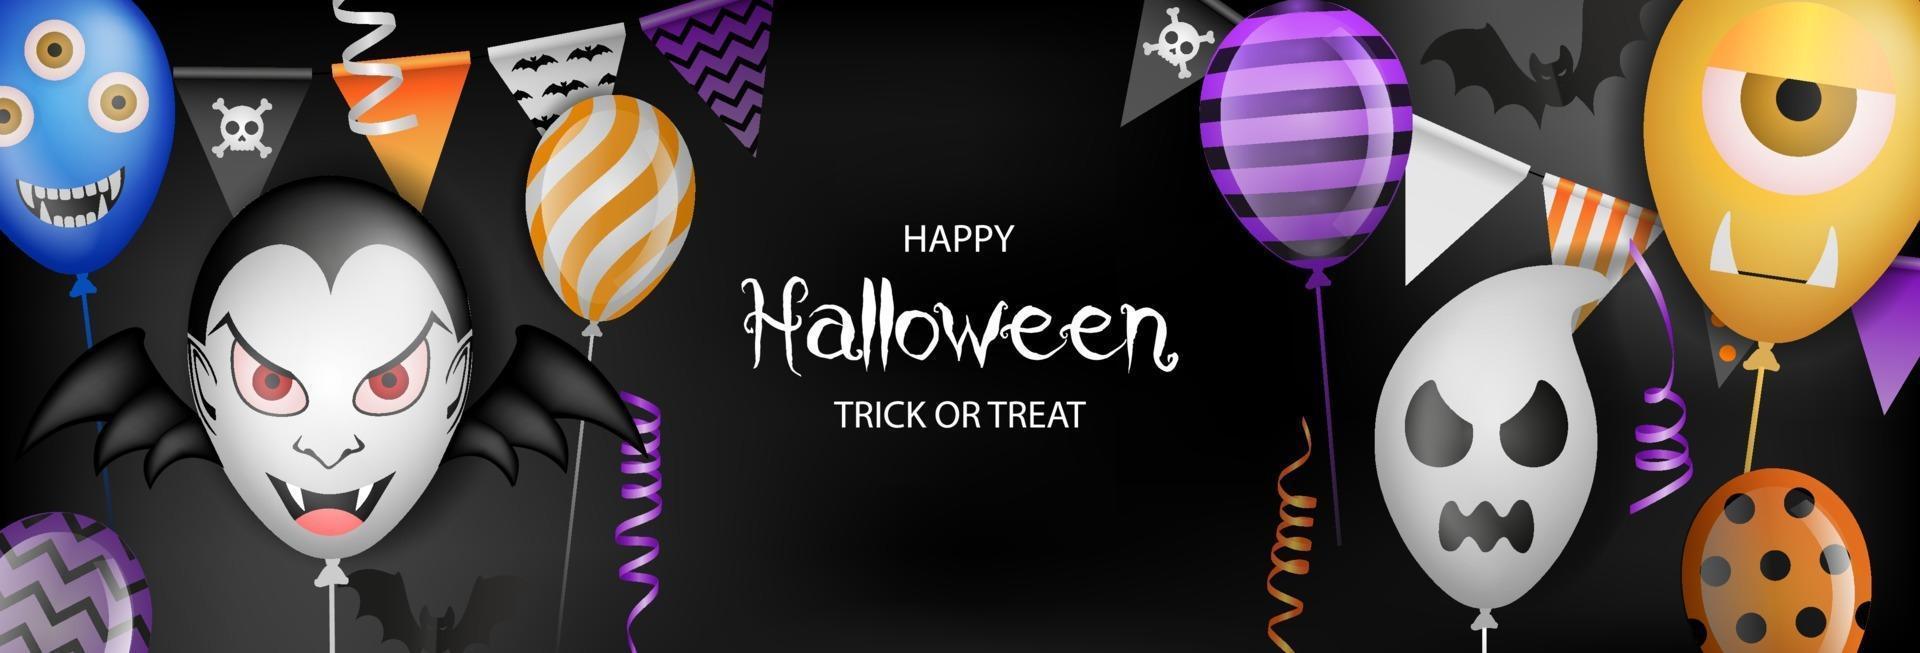 happy halloween banner with party balloons, pennants and streamers vector